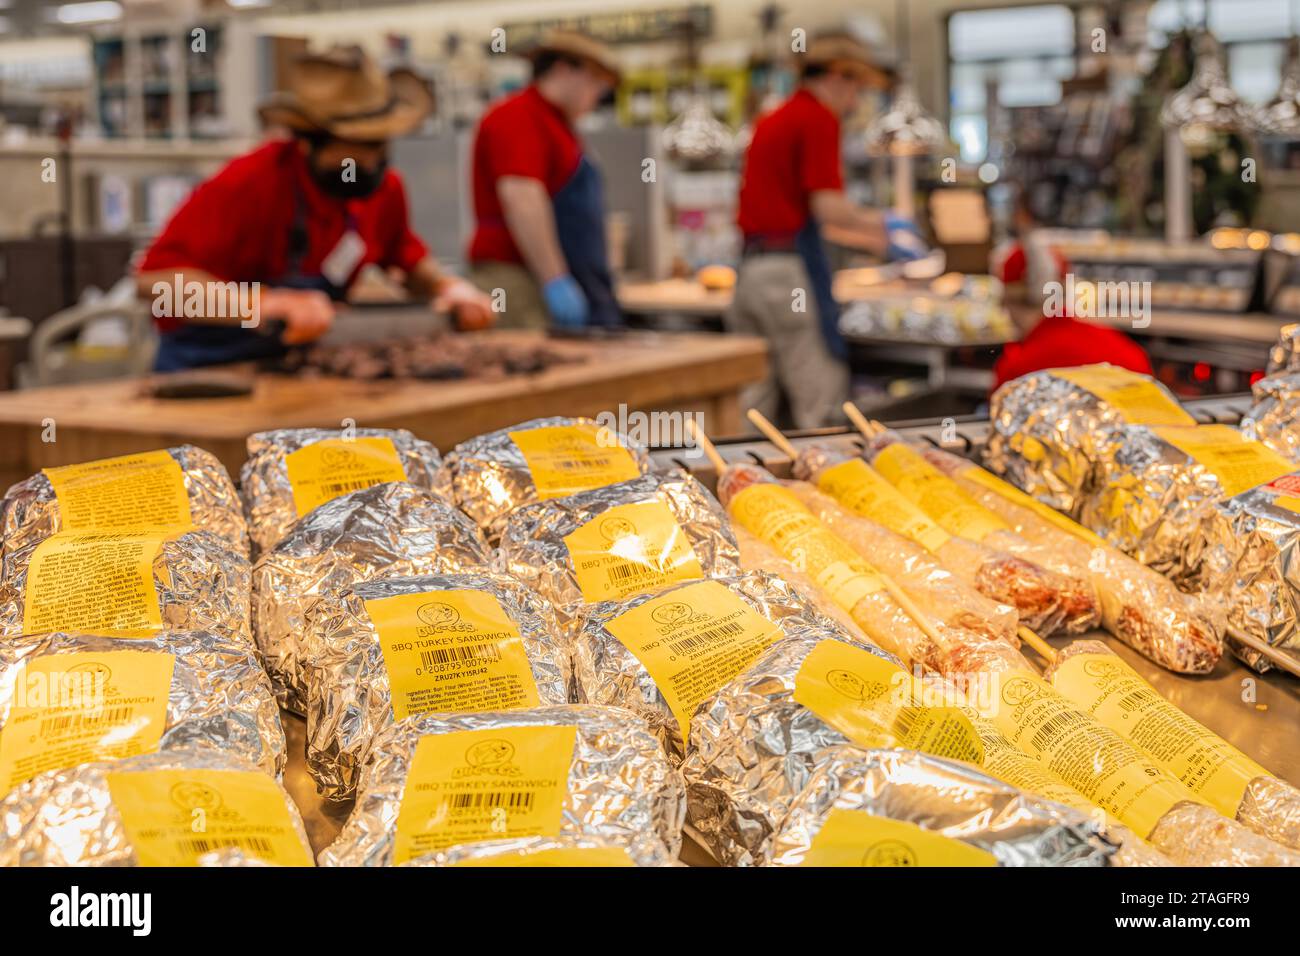 Ready-made BBQ items await while employees chop brisket and prepare sandwiches at Buc-ees mega travel center along I-95 in Daytona Beach, Florida. Stock Photo